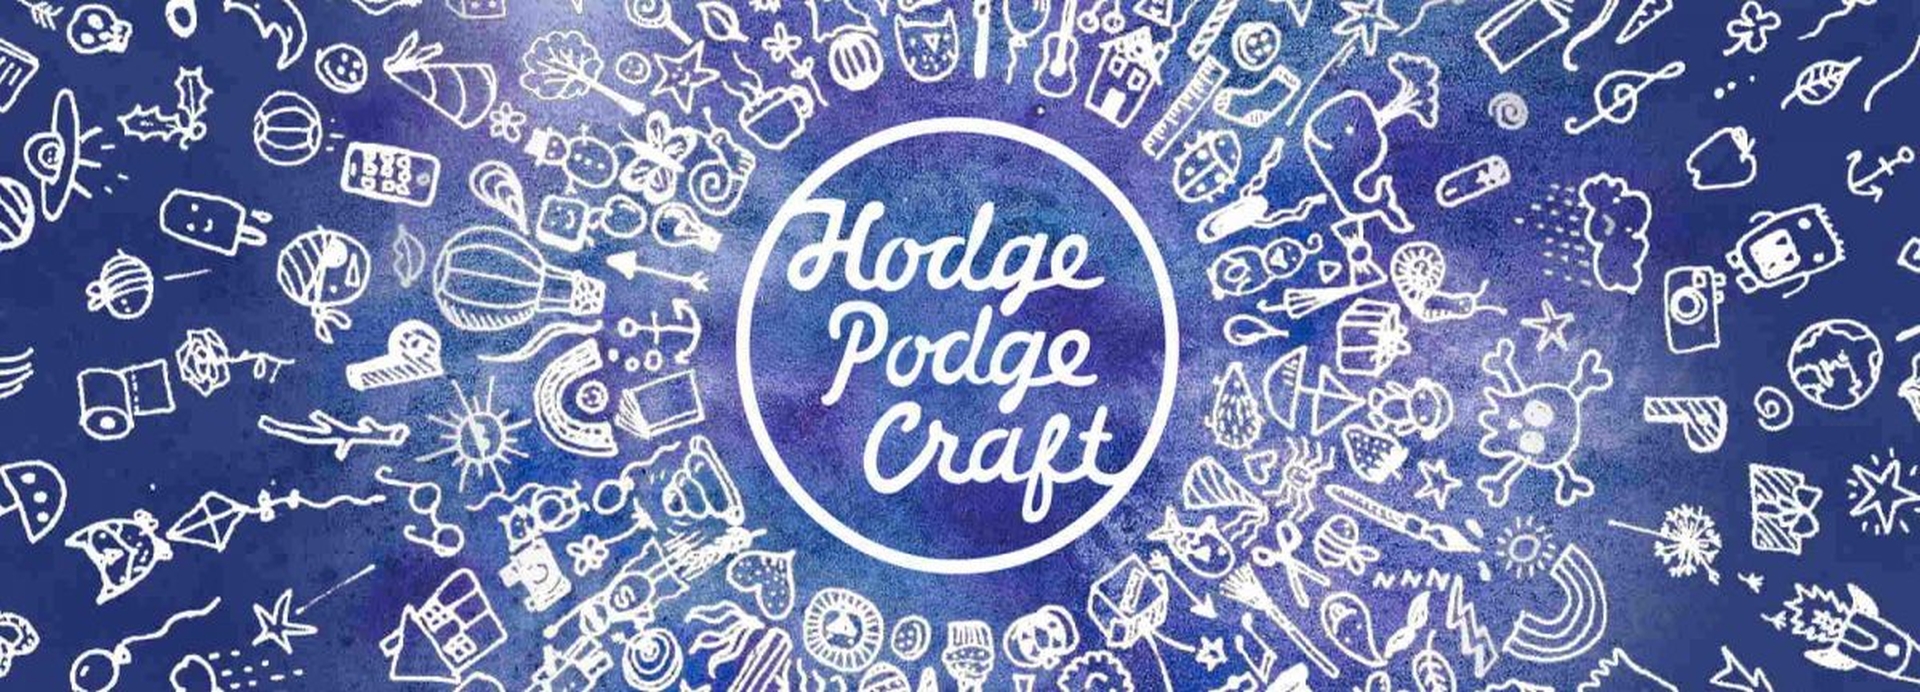 Hodge Podge – Cool crafting for kids of all ages